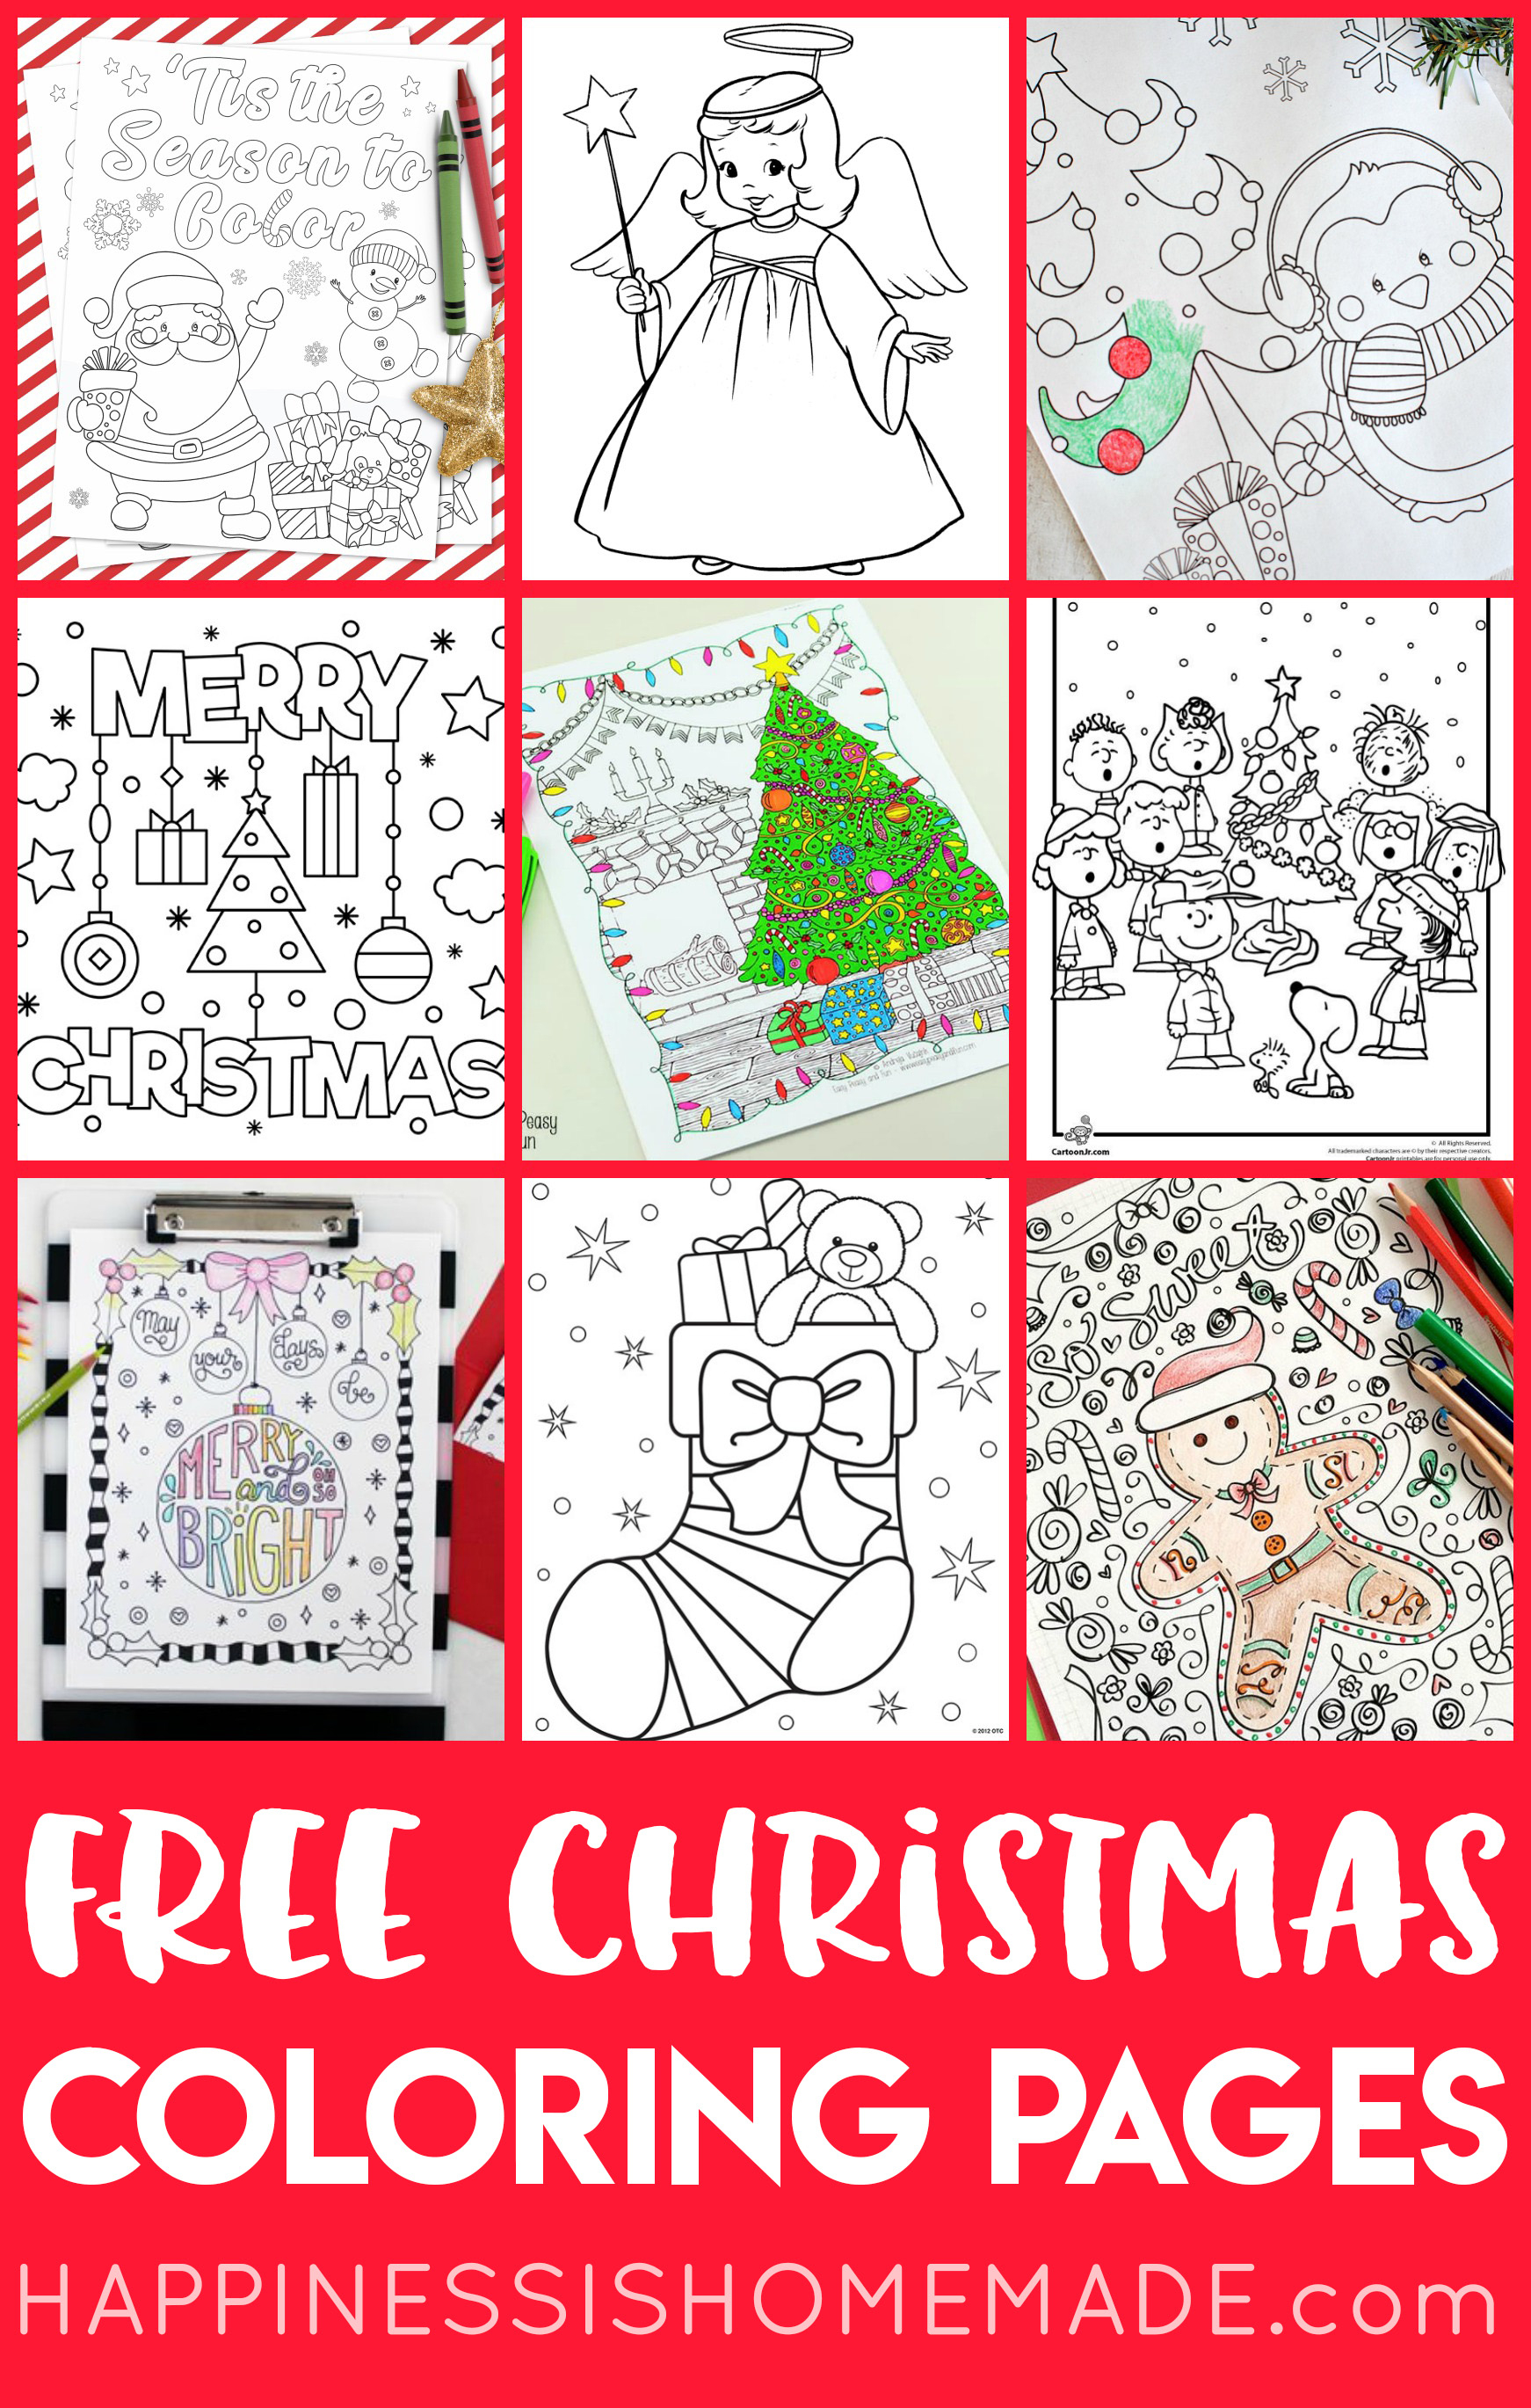 Free Christmas Coloring Pages For Adults And Kids - Happiness Is - Free Printable Christmas Pictures